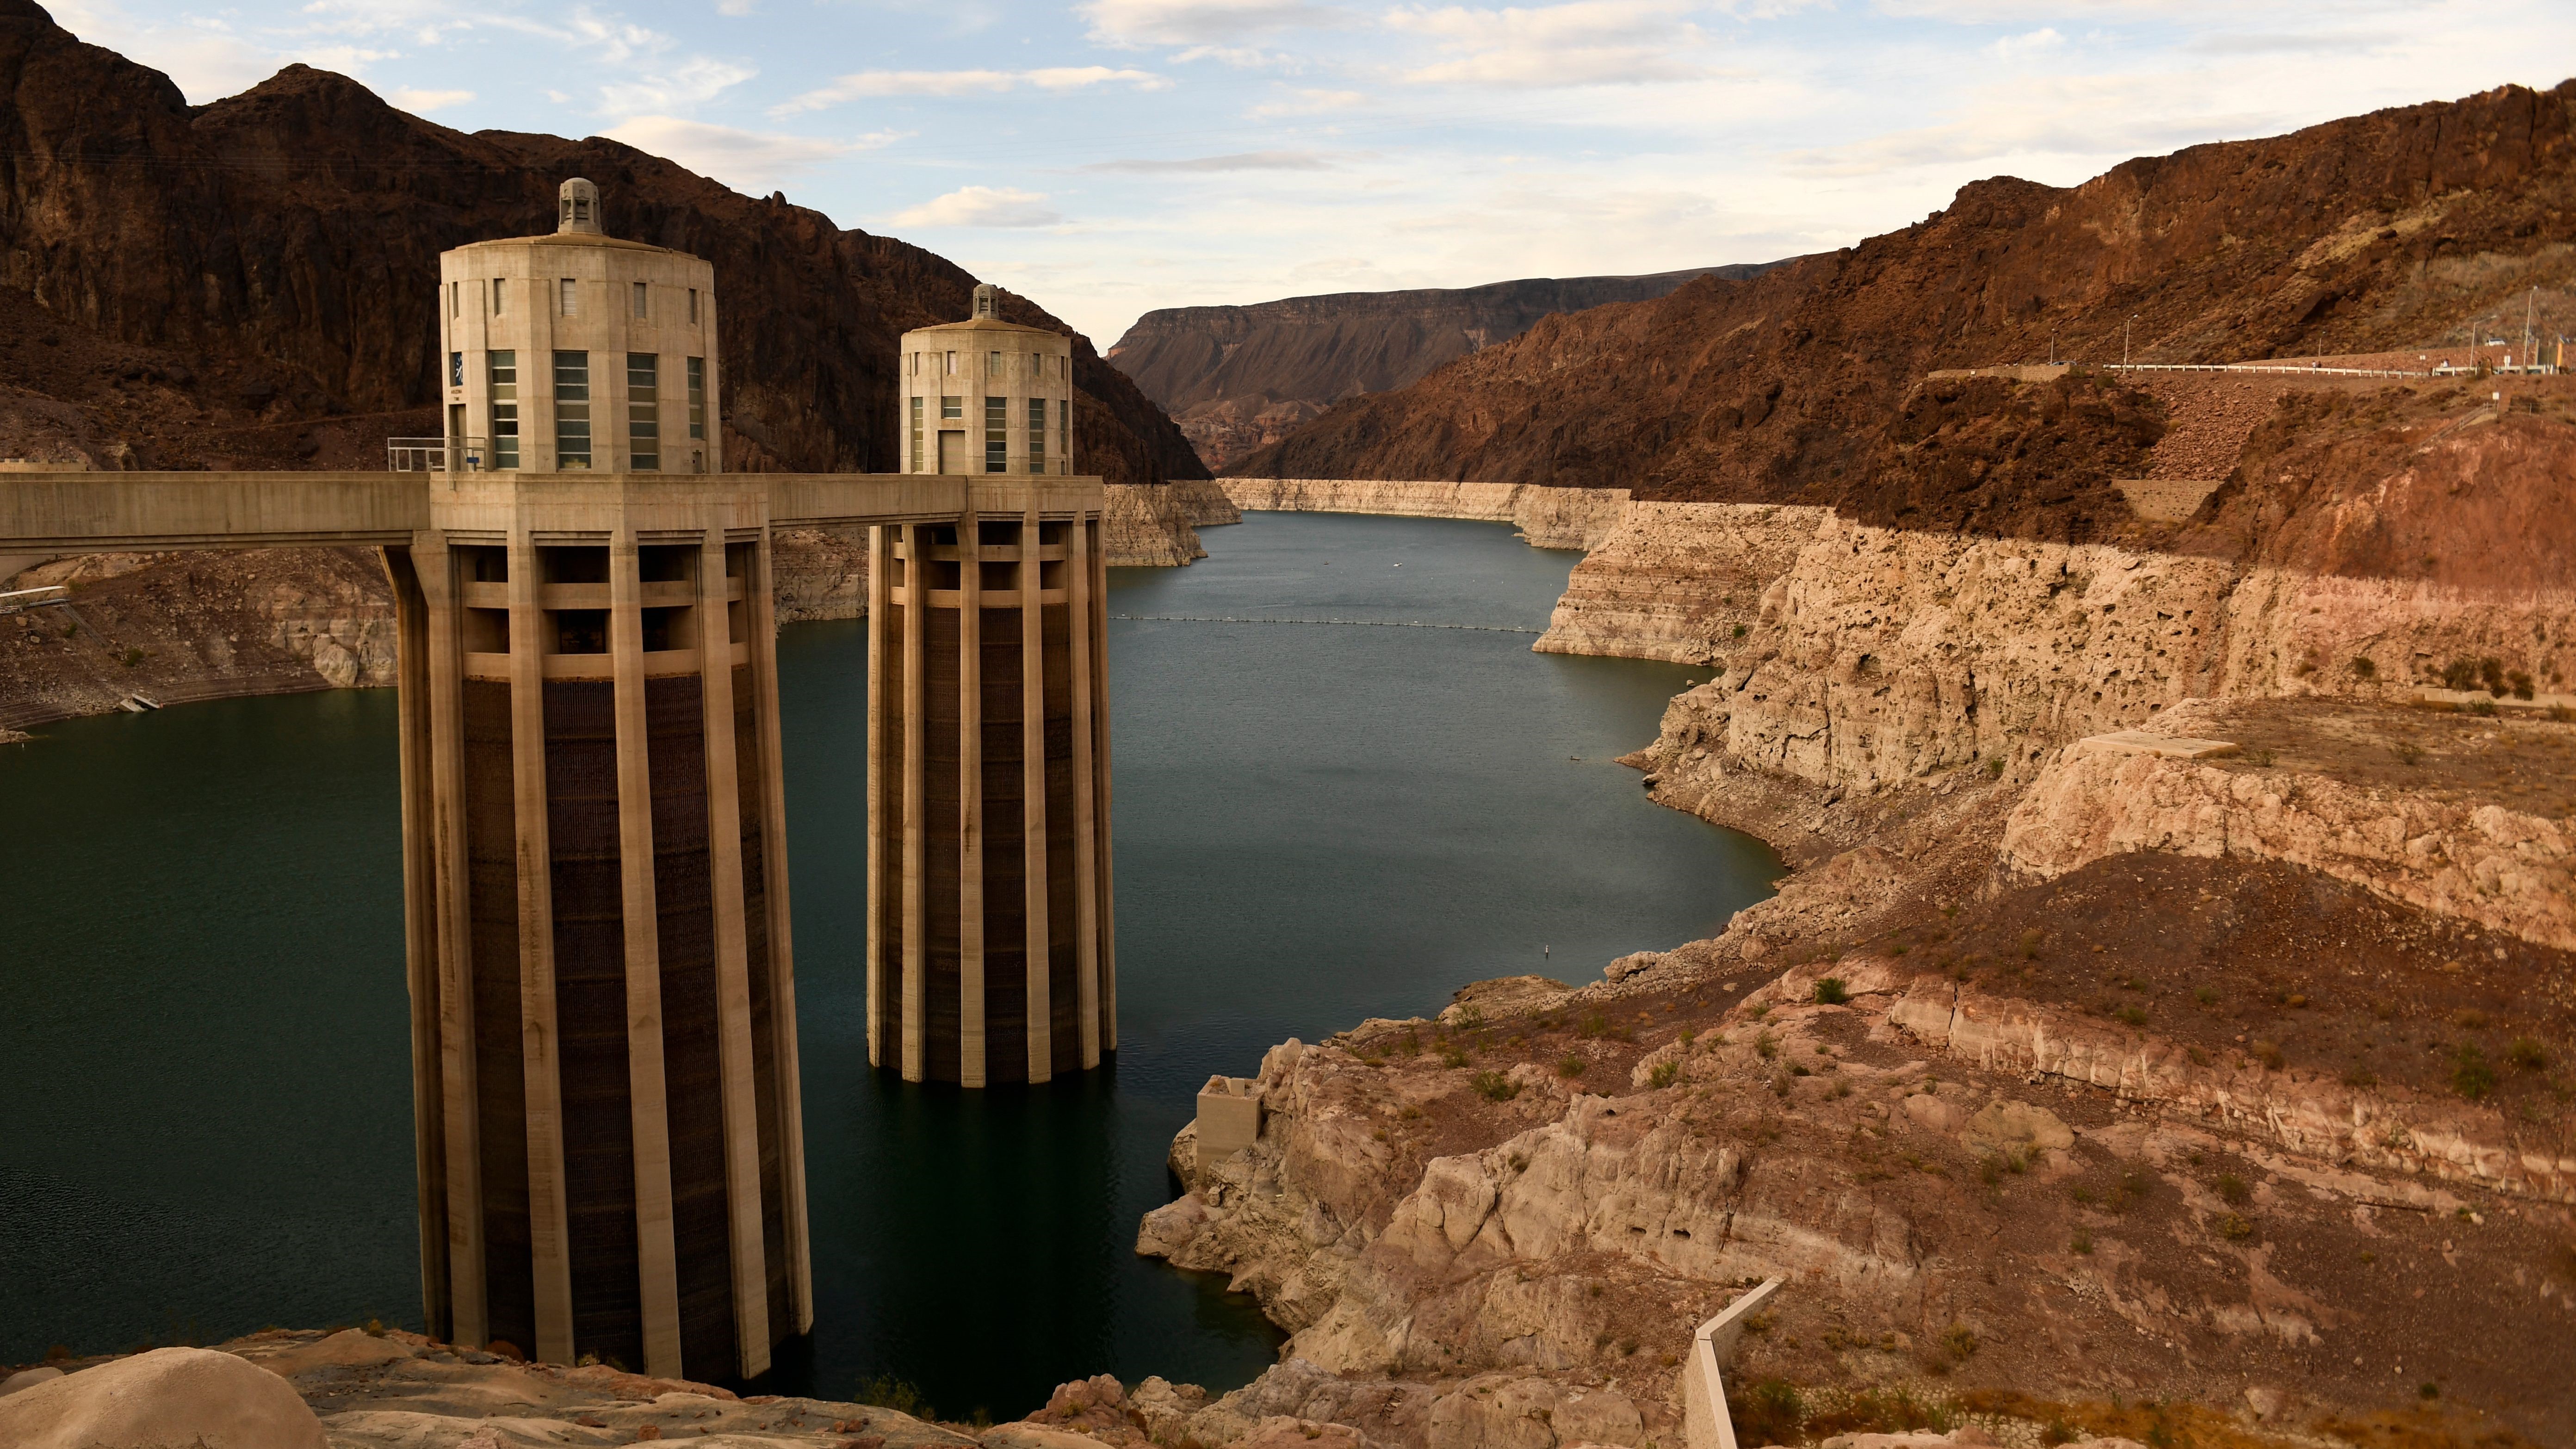 intake tower at hoover dam with water levels far below normal